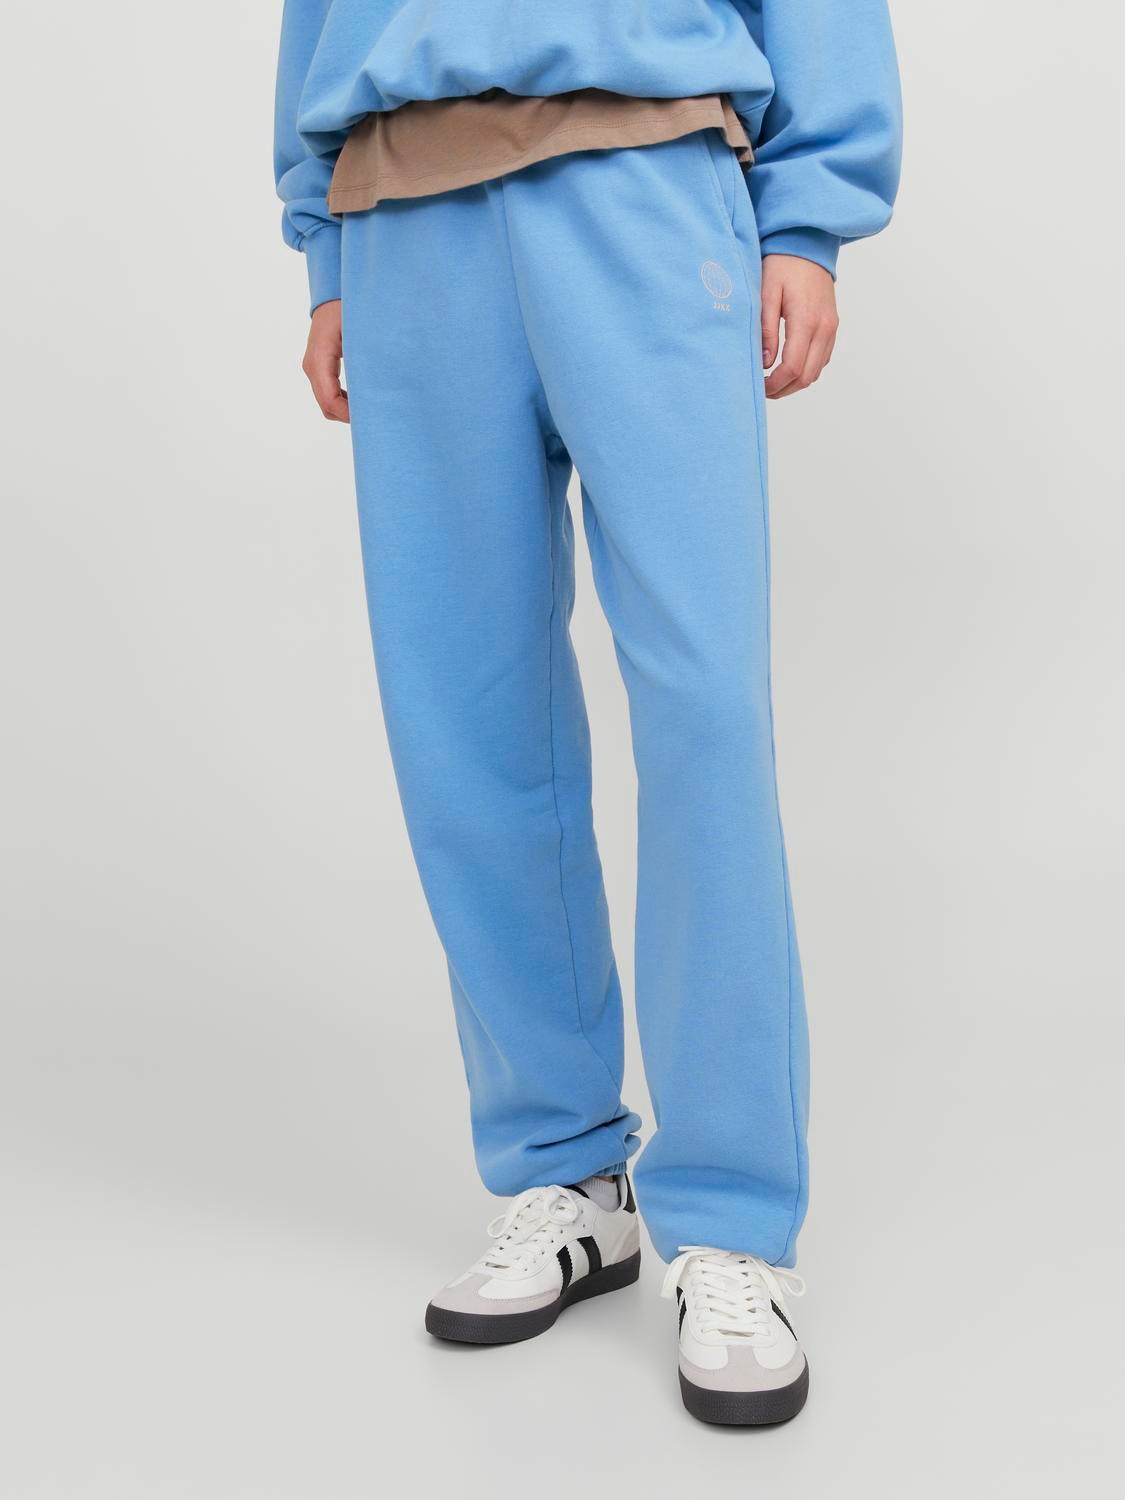 JJXX Παντελόνι Relaxed Fit Φόρμα -Silver Lake Blue - 12244364